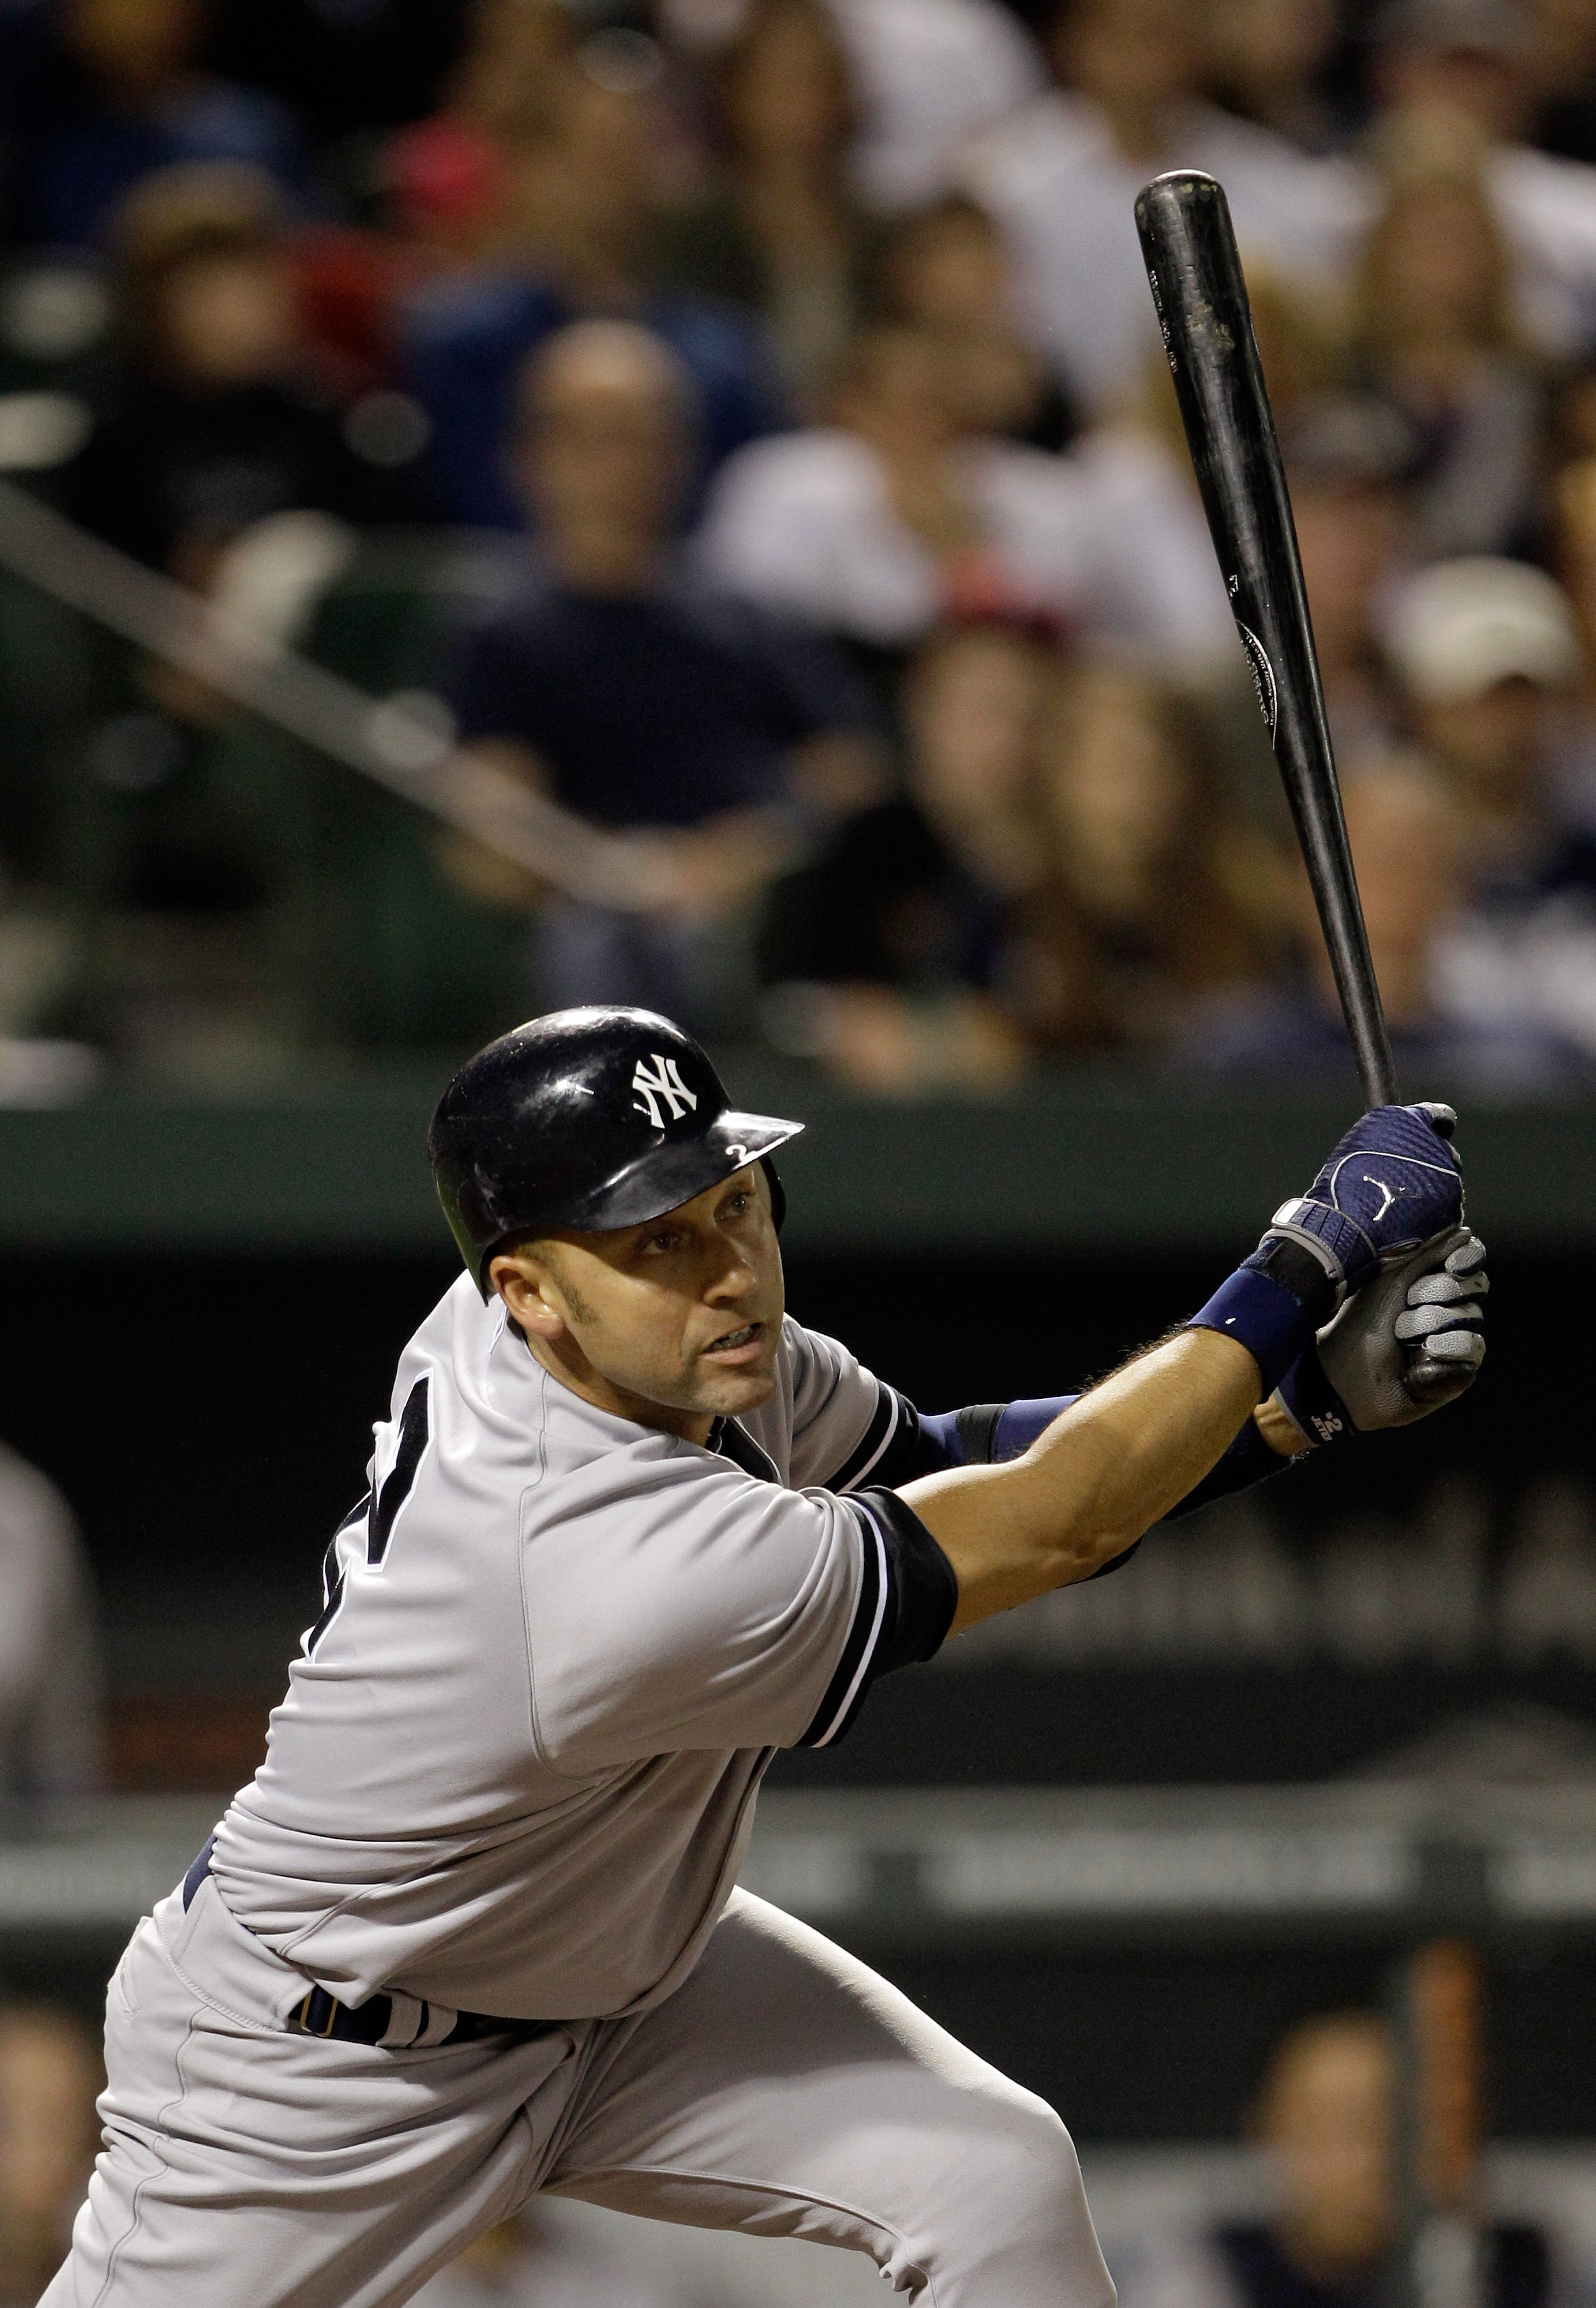 Ranking Derek Jeter and the 12 Other New York Yankees Captains